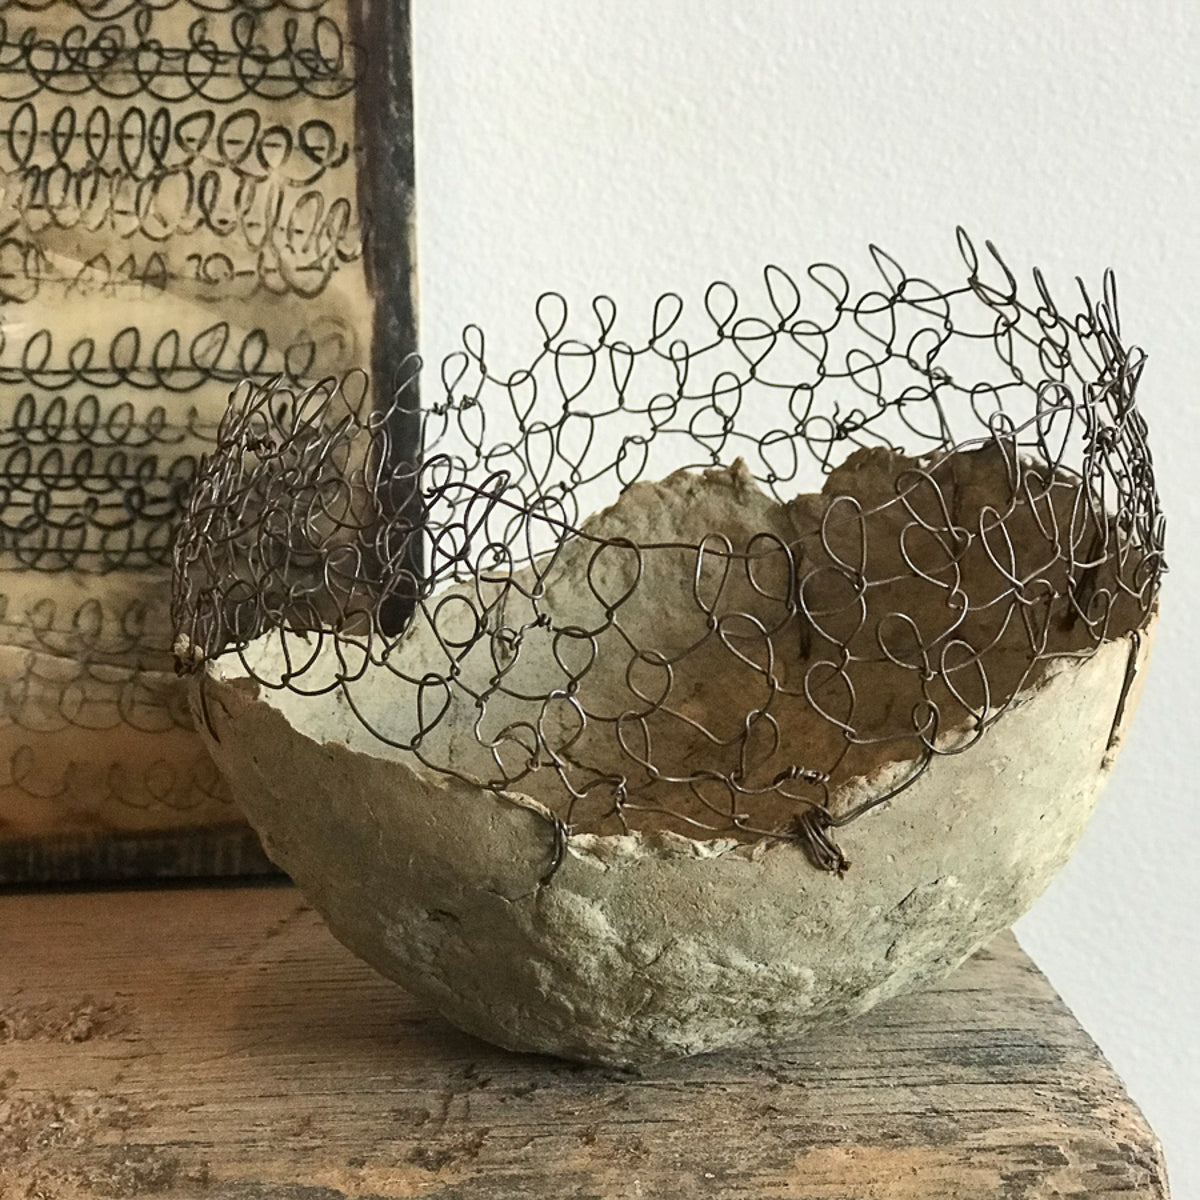 Vessel Study No. 38, handmade with recycled cardboard boxes and wire. A one-of-a-kind Jennifer Alden Design contemporary sculpture.